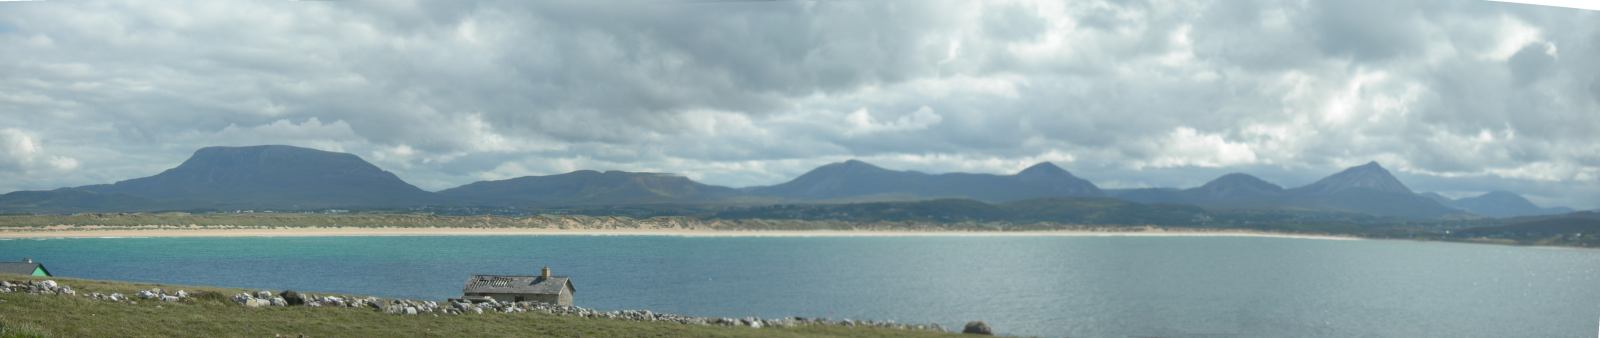 The mainland viewed from the island - from flat topped Muckish on the left to the sharp quartzite peak of Errigal on the right.